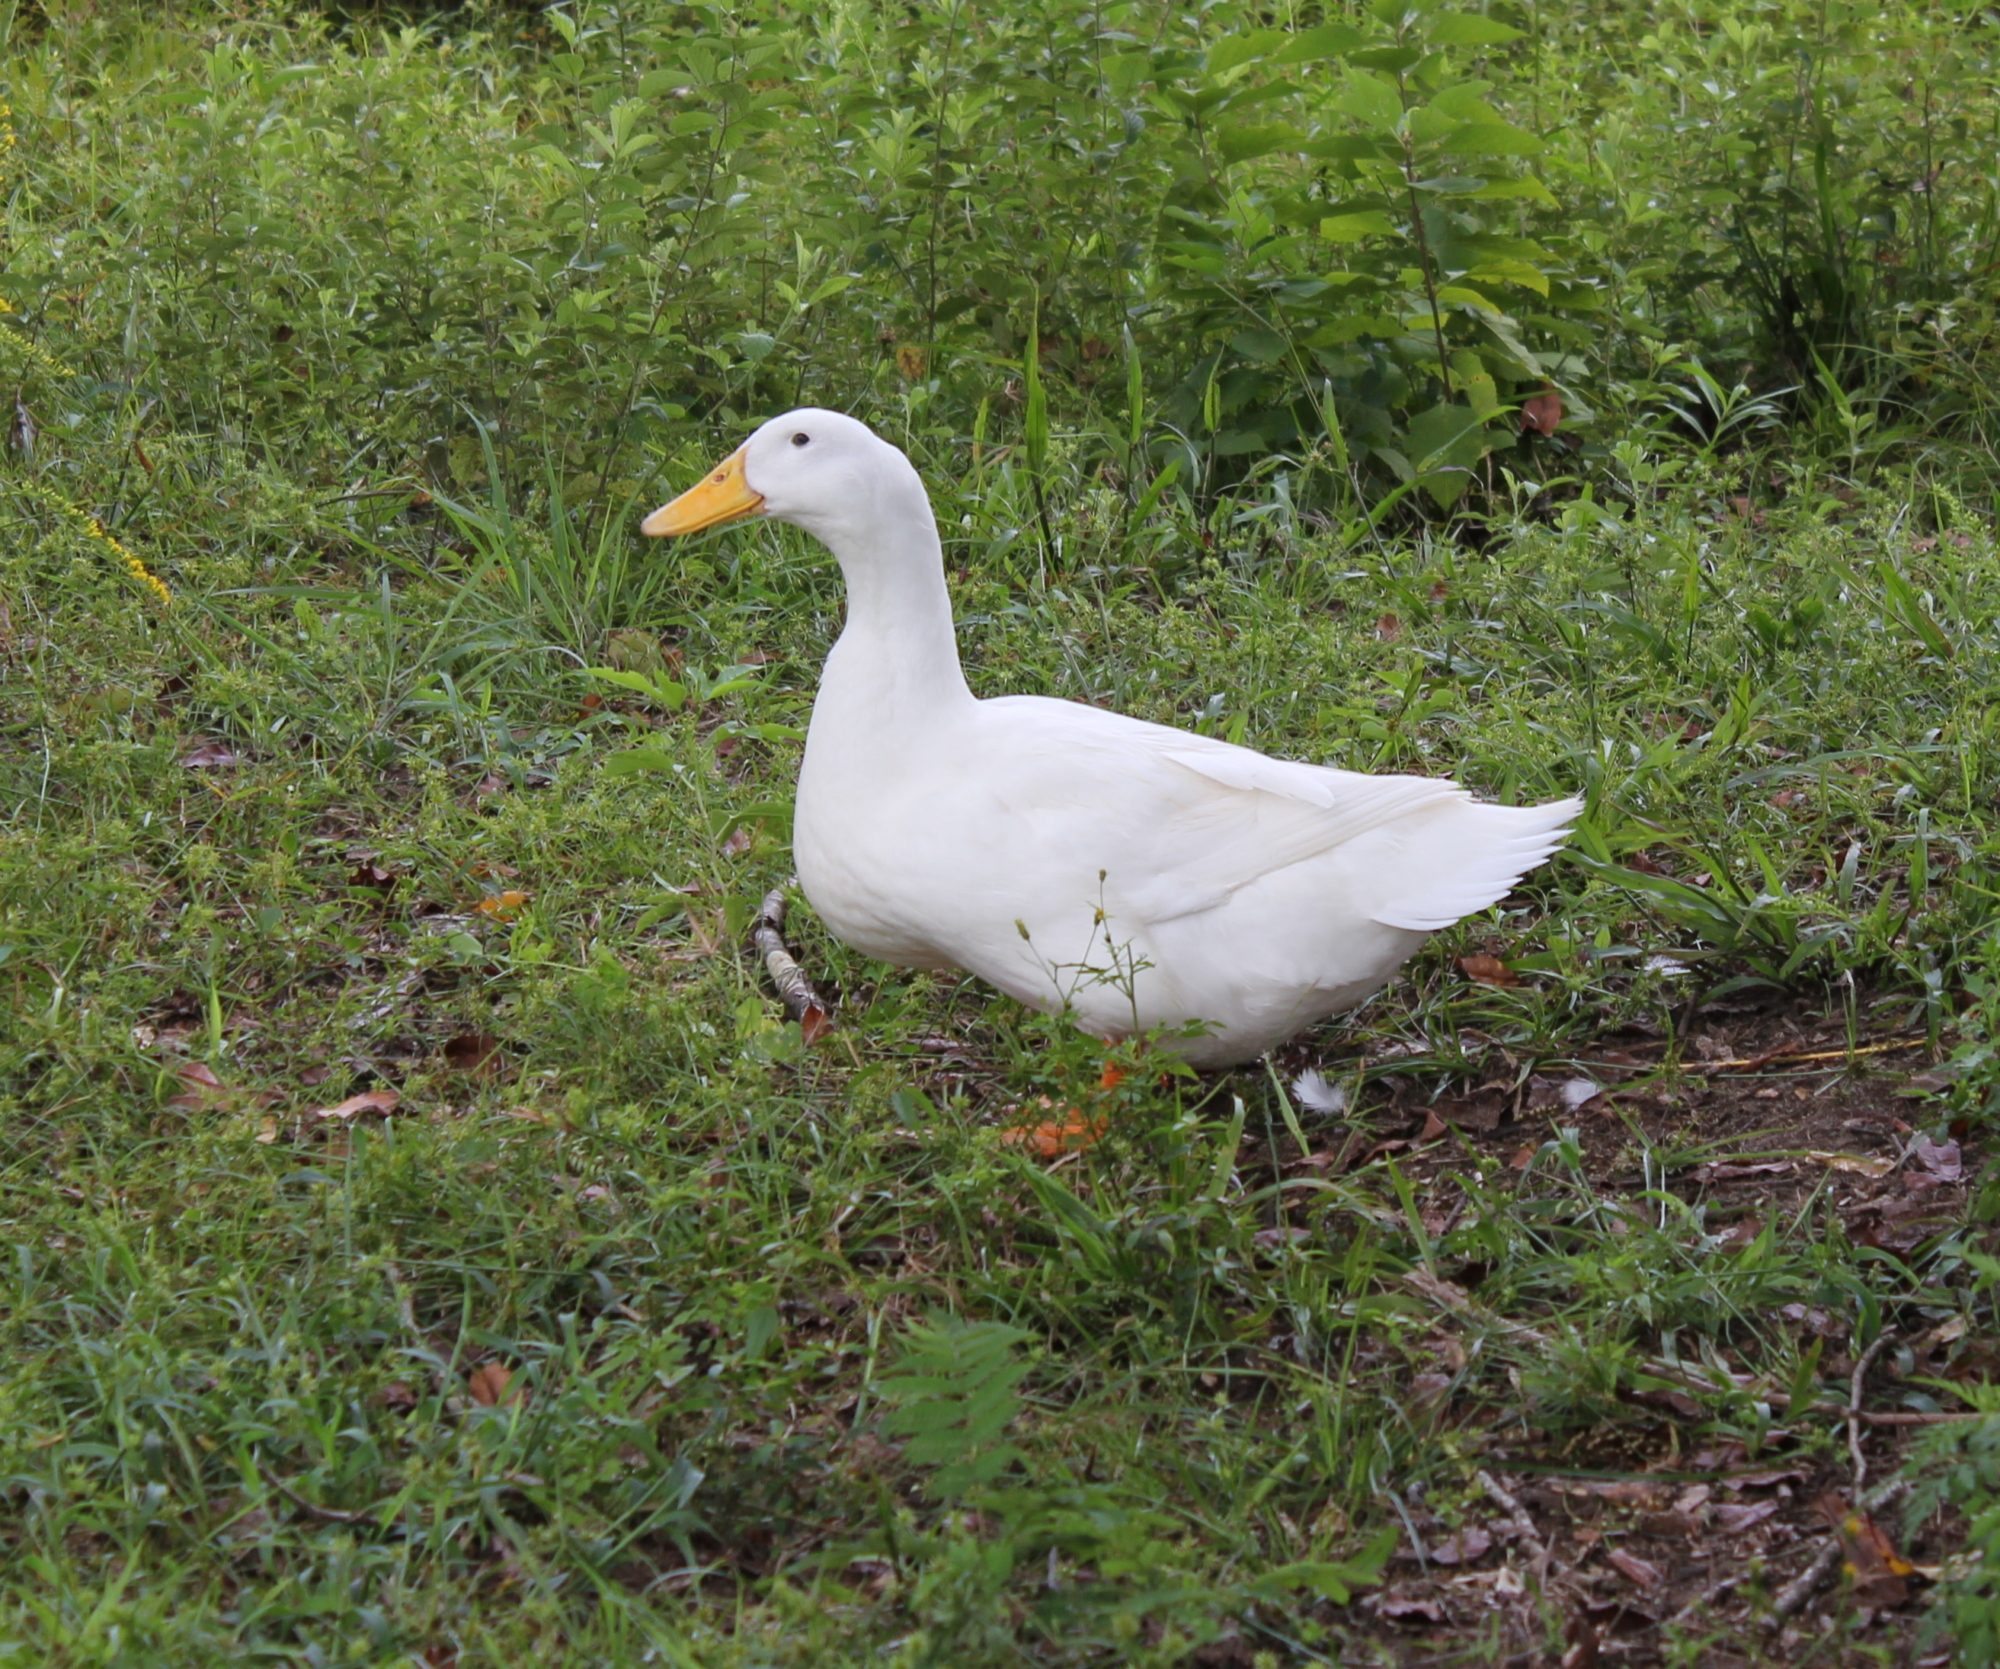 Bruno is the only female duck I have at the moment. She is very demanding of the drakes. If the drakes aren't following everywhere she goes, she will stop and call to them loudly. Once they start following she happily continues to wherever she is going.